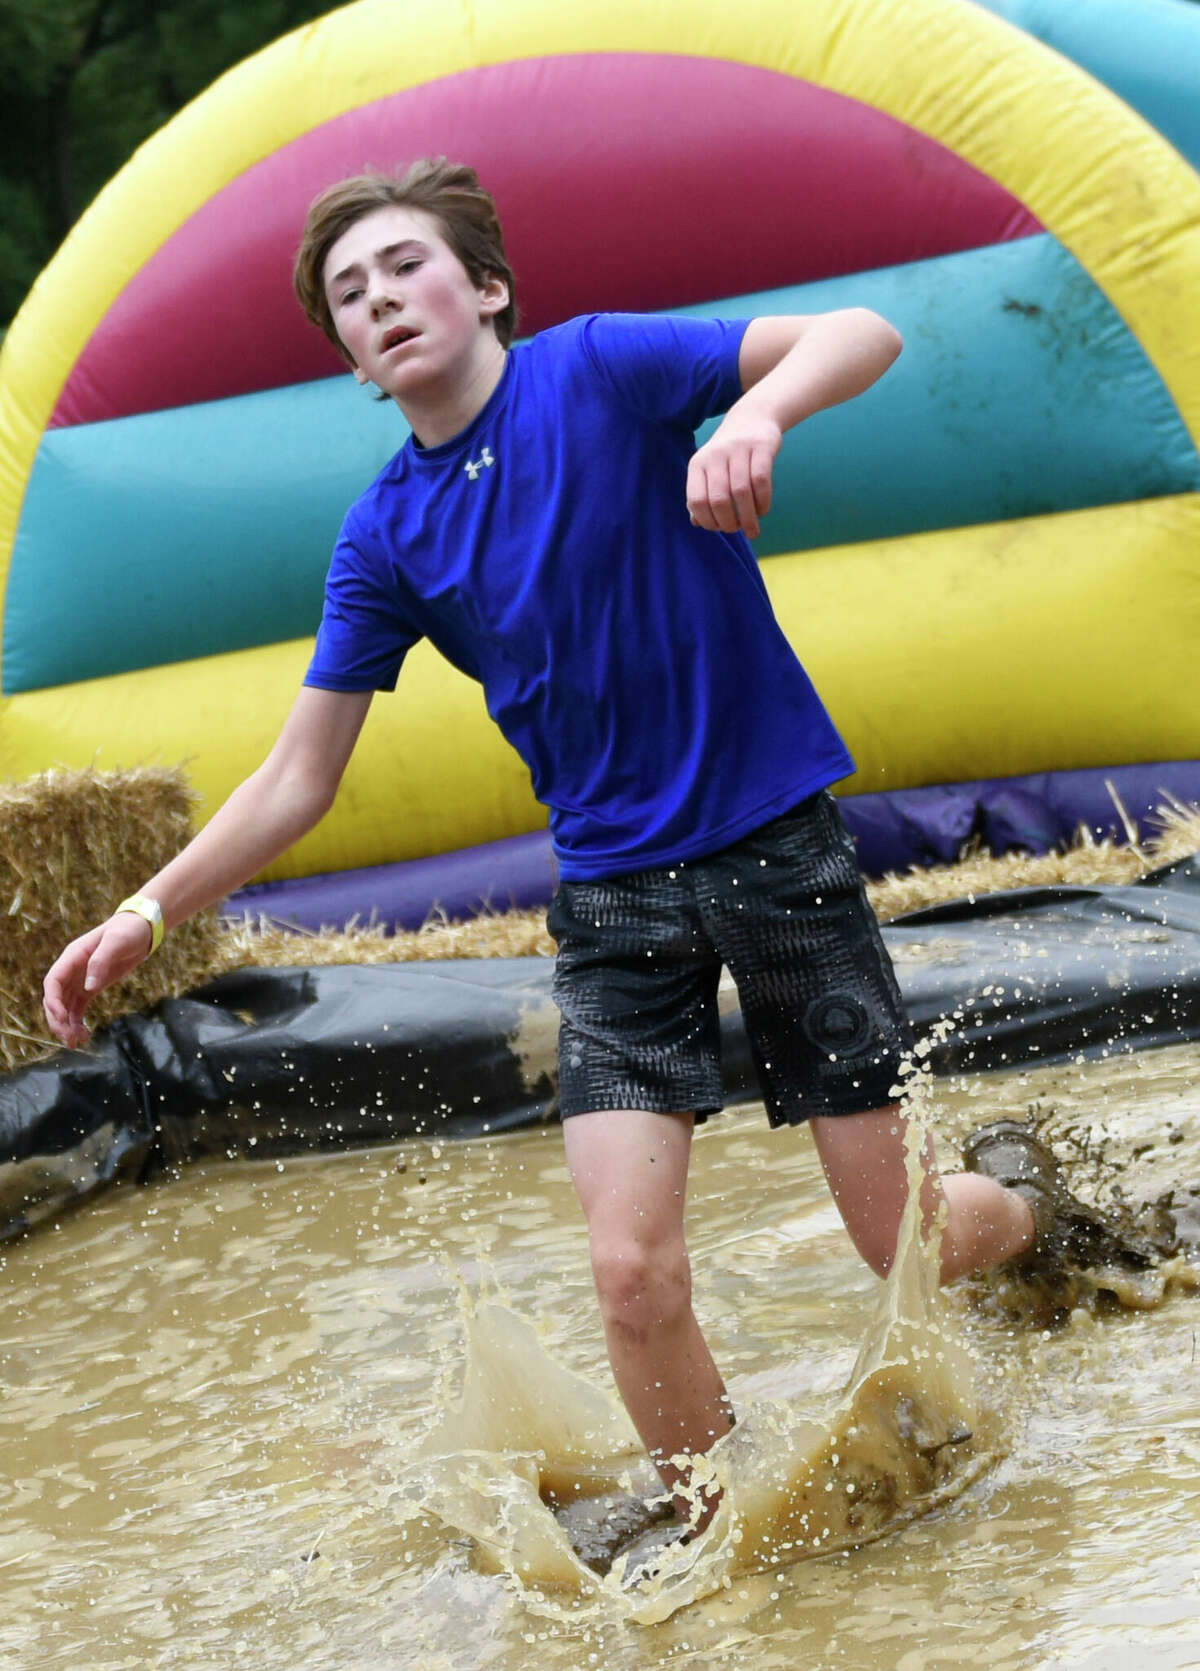 Greenwich's Teddy Hojlo, 14, slogs through the mud to finish in first place overall at the 10th annual Boys & Girls Club of Greenwich Muddy Up 5K run at Camp Simmons in Greenwich, Conn. Sunday, Oct. 2, 2022.